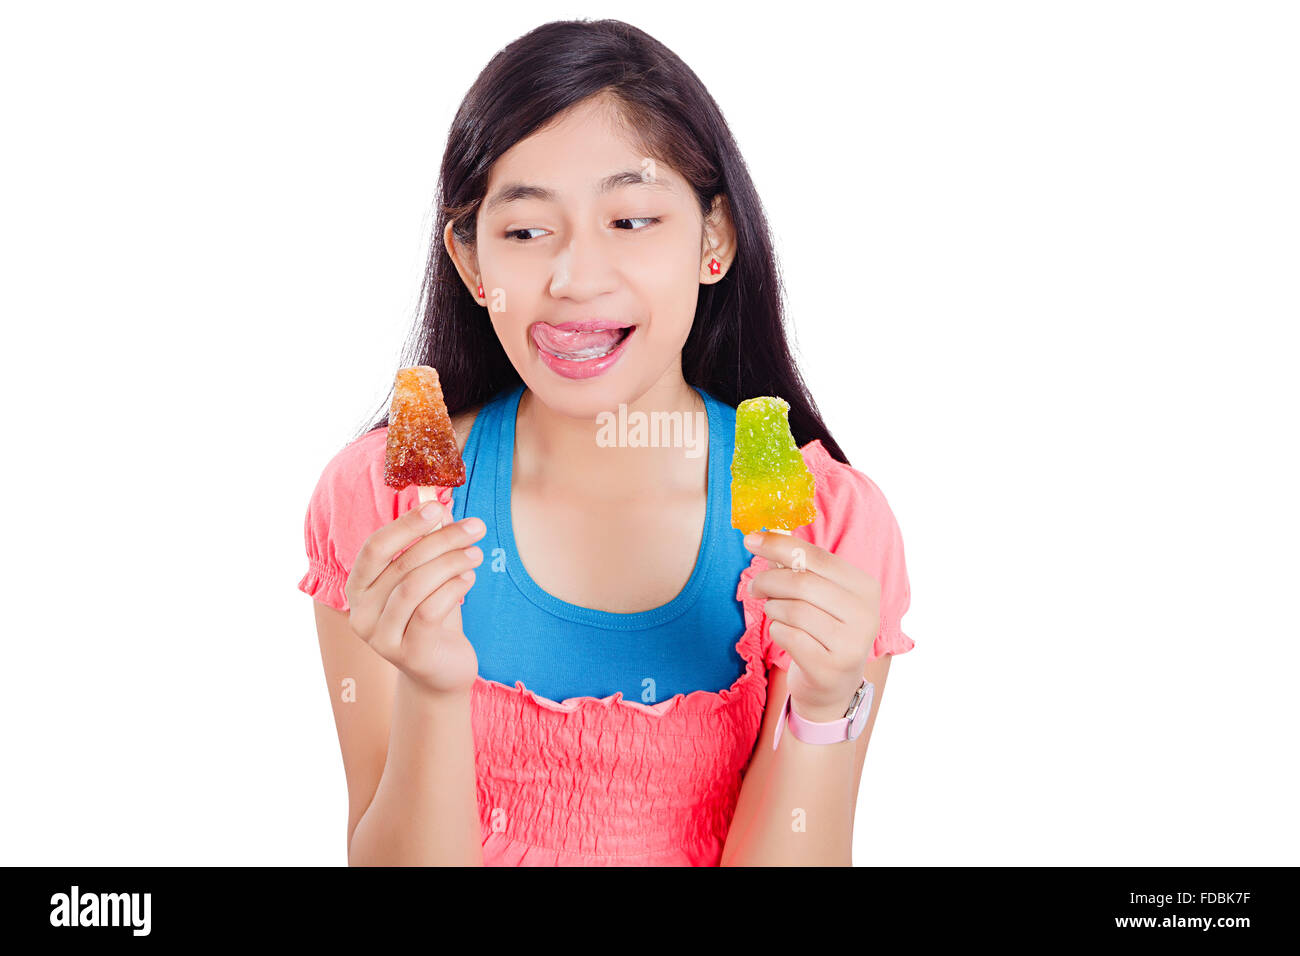 1 Teenager Girl Temptation Delicious Ice cream Watching Stock Photo